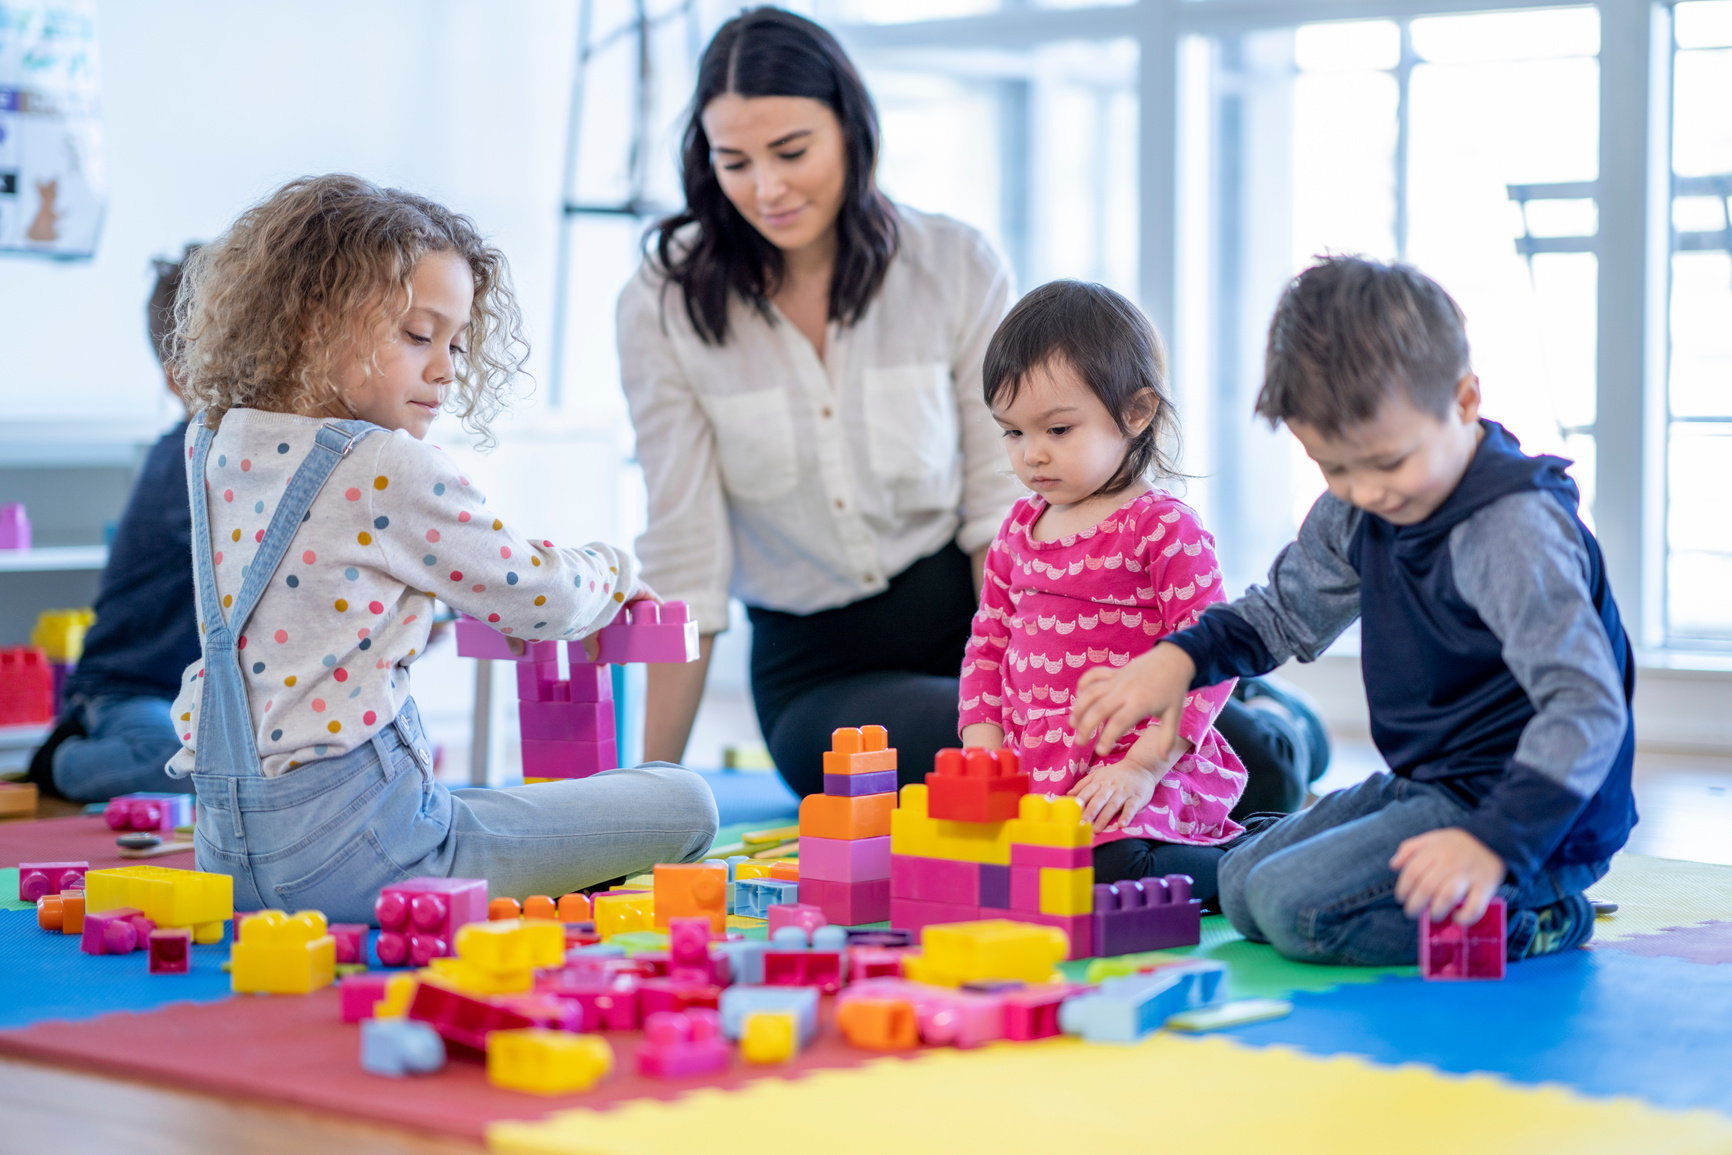 Childcare Provider Playing with Children stock photo